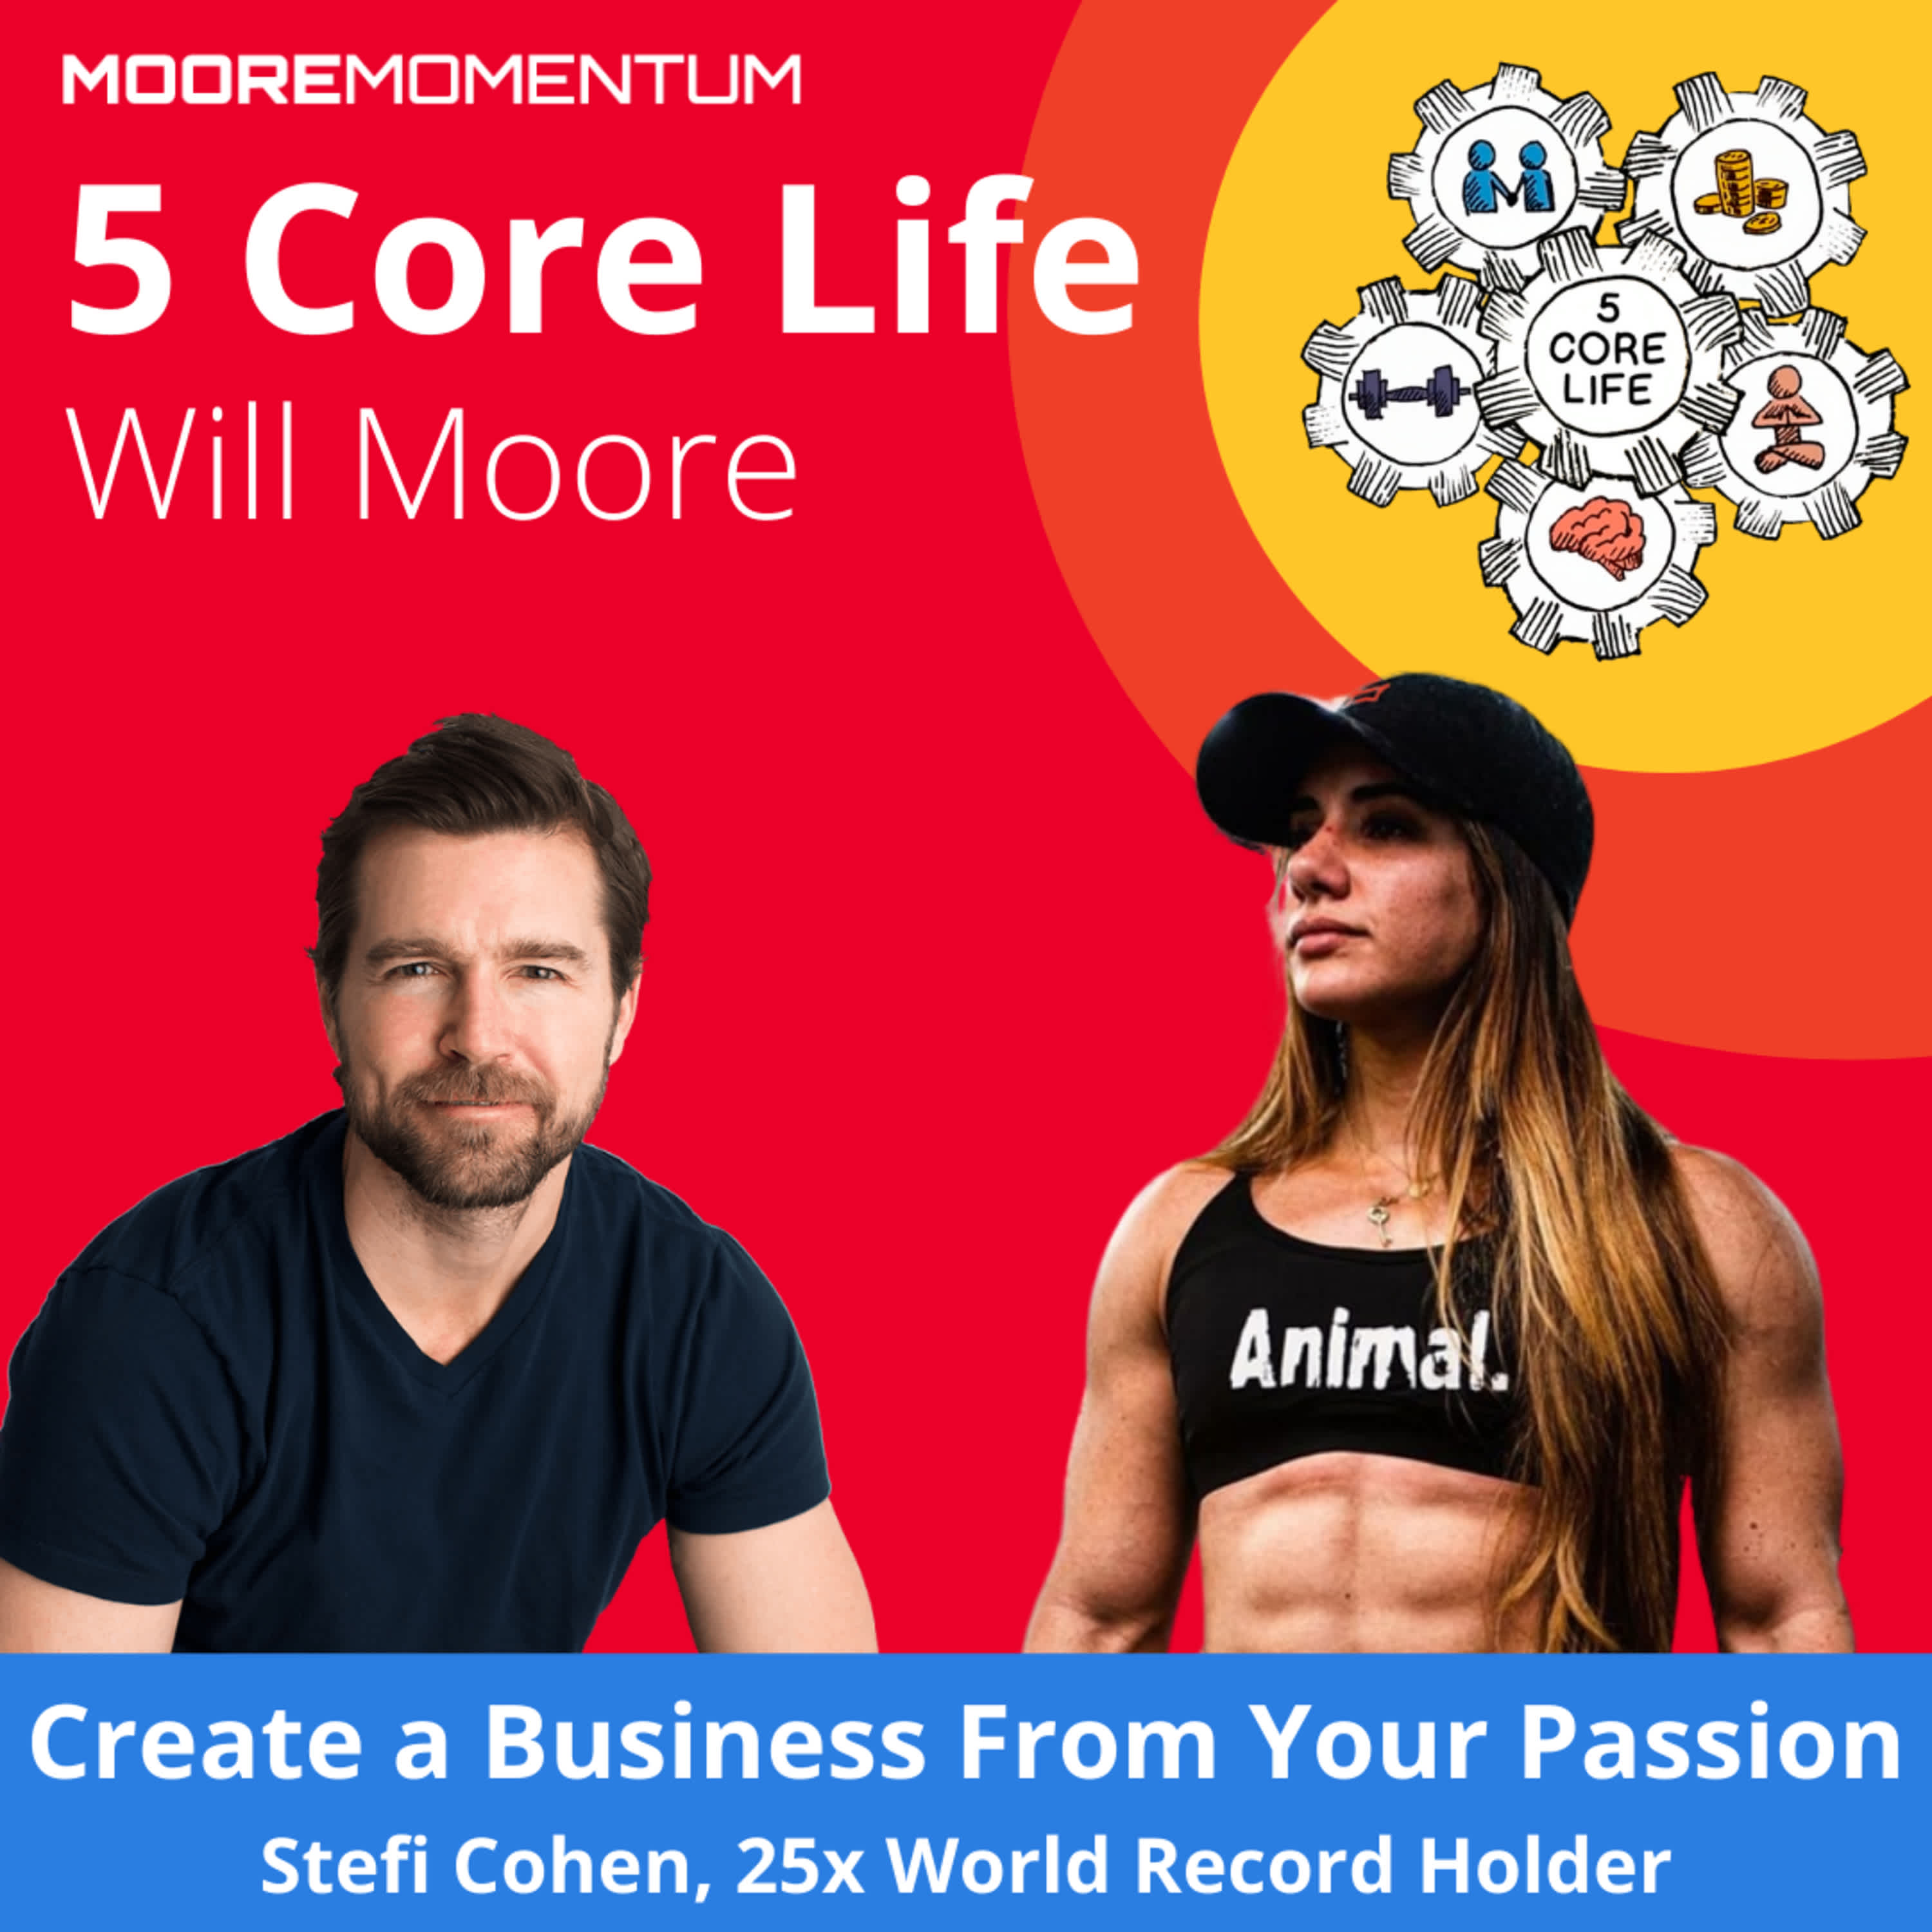 Mistakes Every Entrepreneur Should Avoid, How to Create a Business From Your Passion | Stefi Cohen 25x World Record Holder